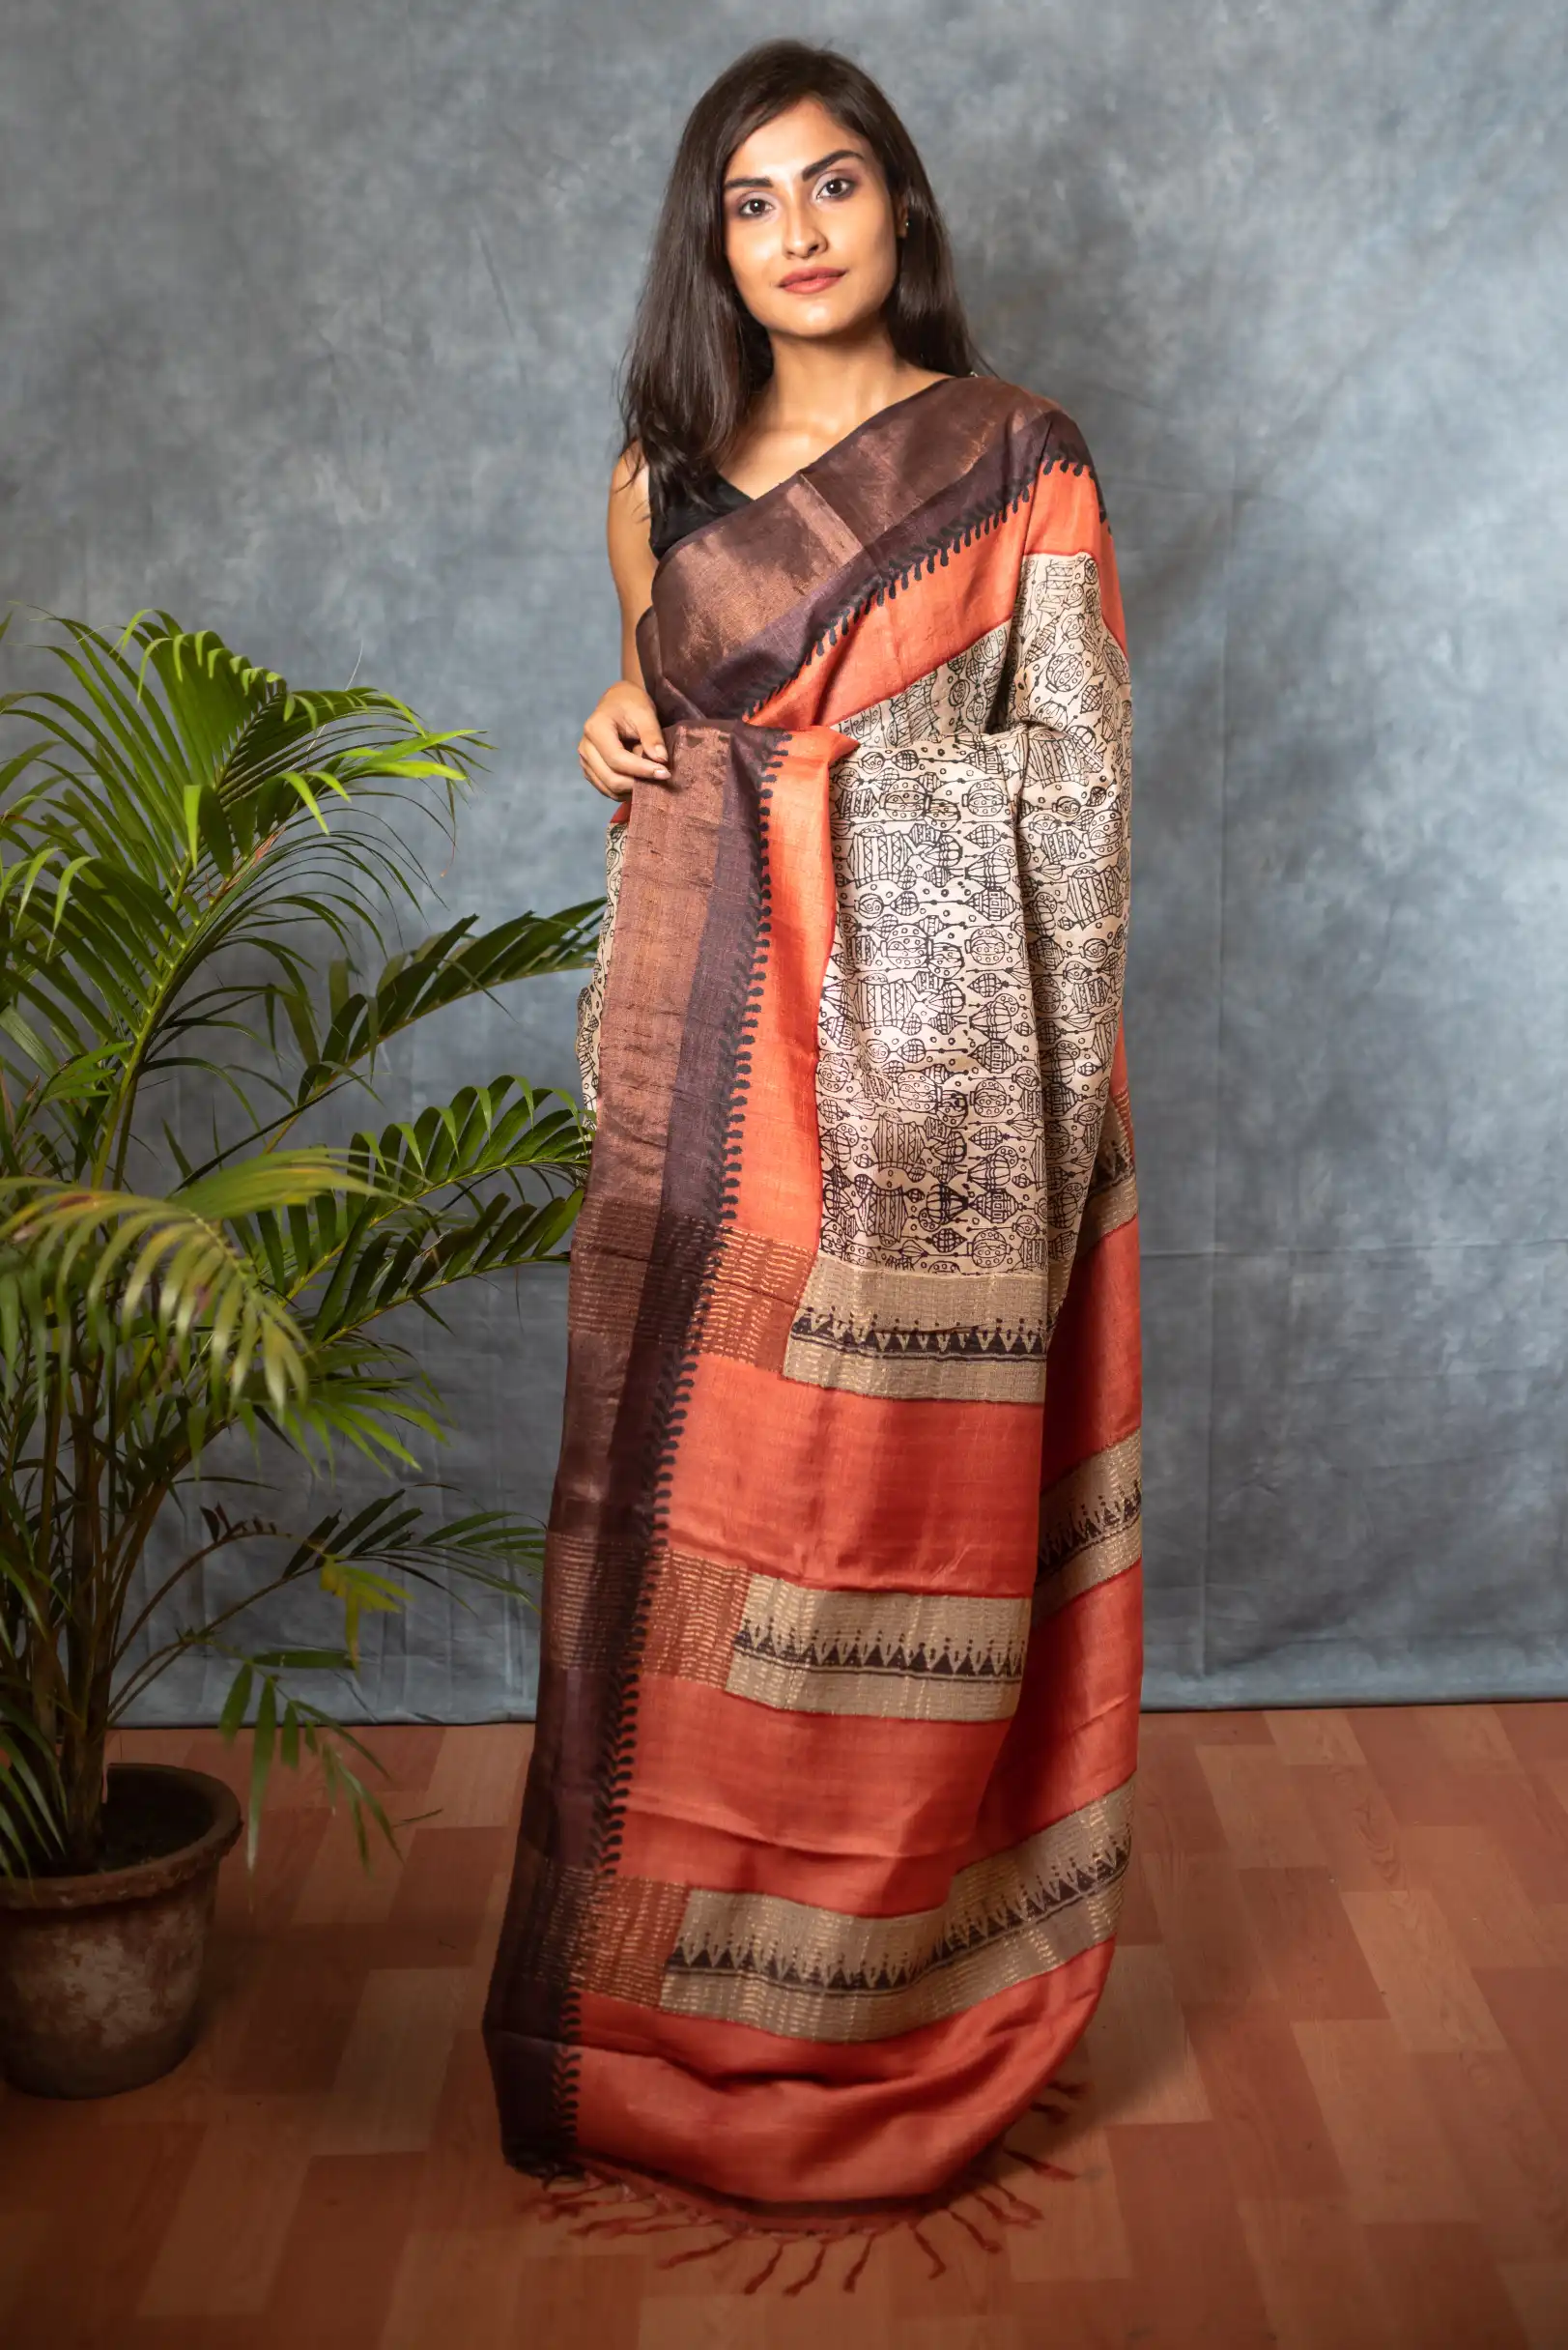 Latest collection of block print saree perfect for all occasions-1 -Ramdhanu Ethnic